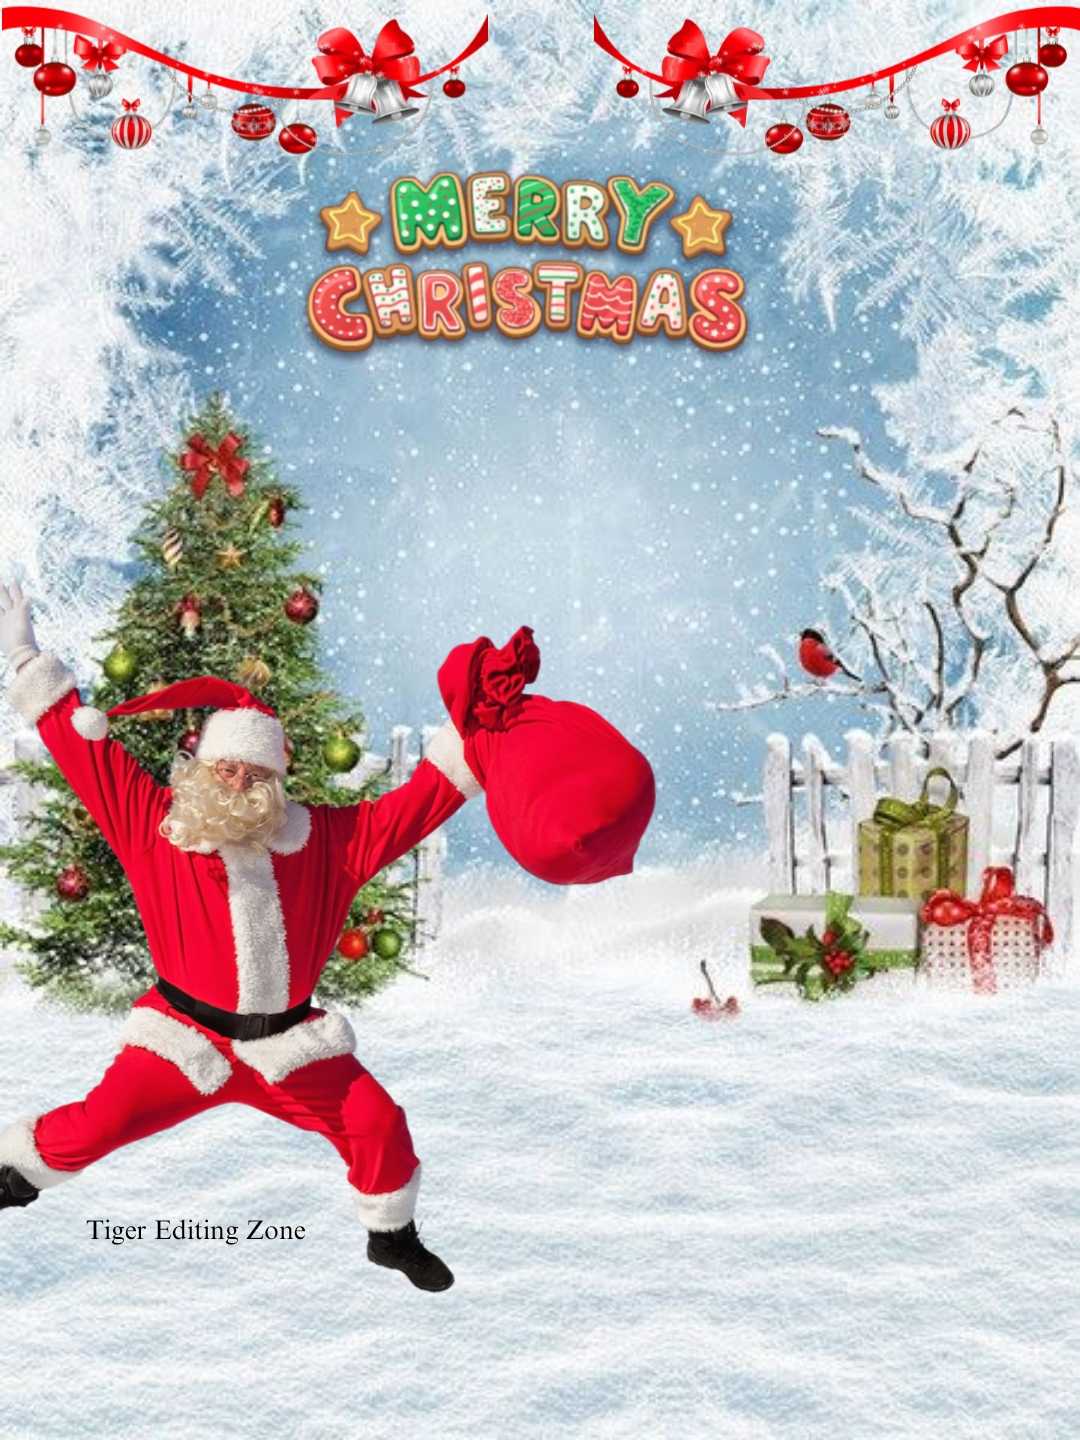 Christmas Background Images for Photoshop